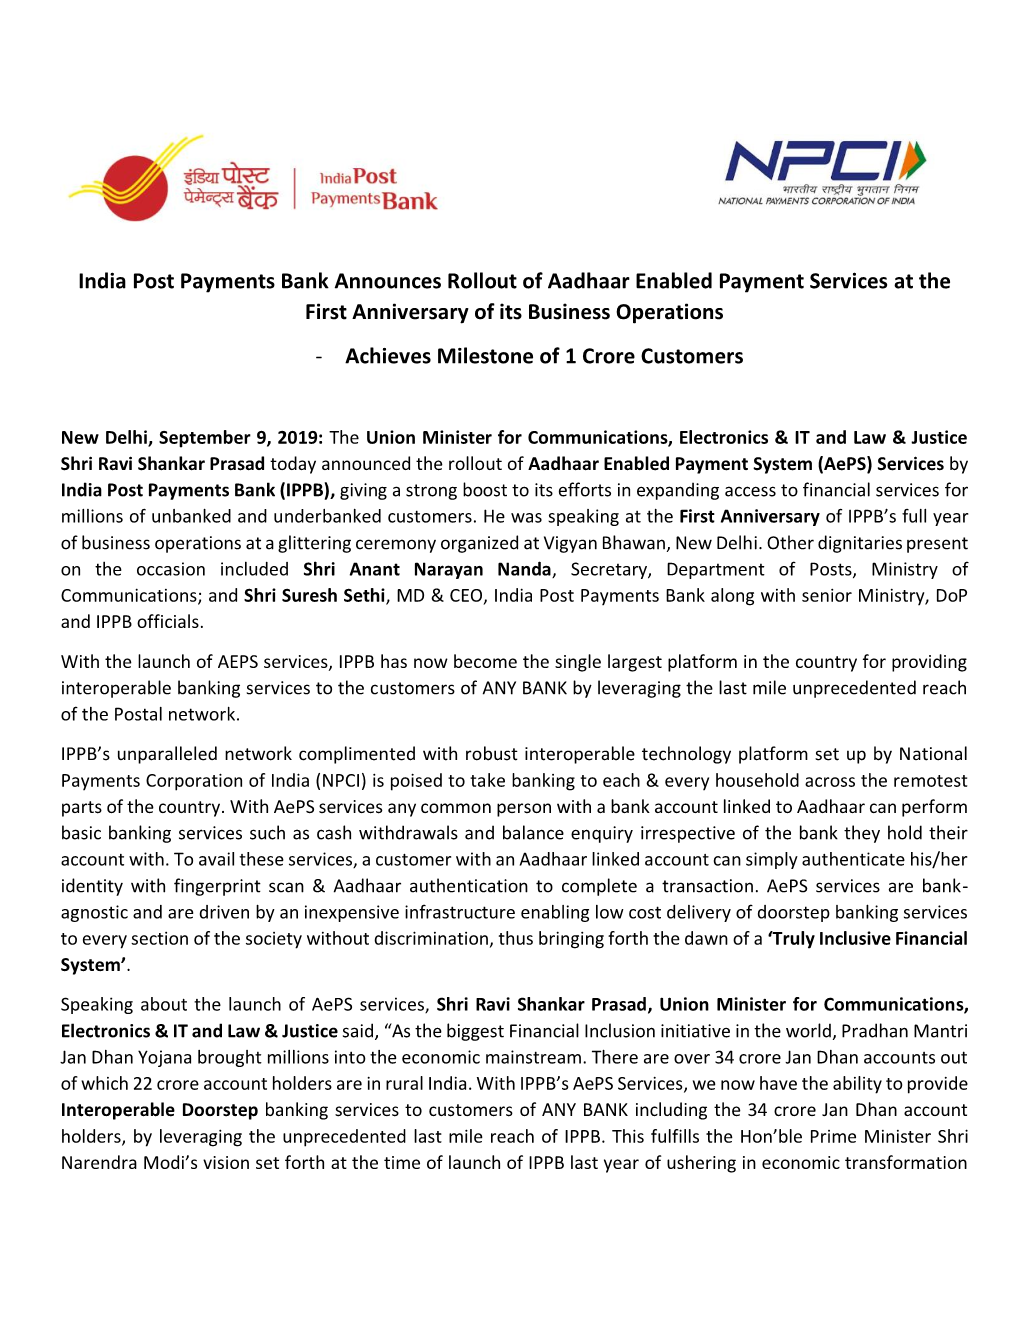 India Post Payments Bank Announces Rollout of Aadhaar Enabled Payment Services at the First Anniversary of Its Business Operatio